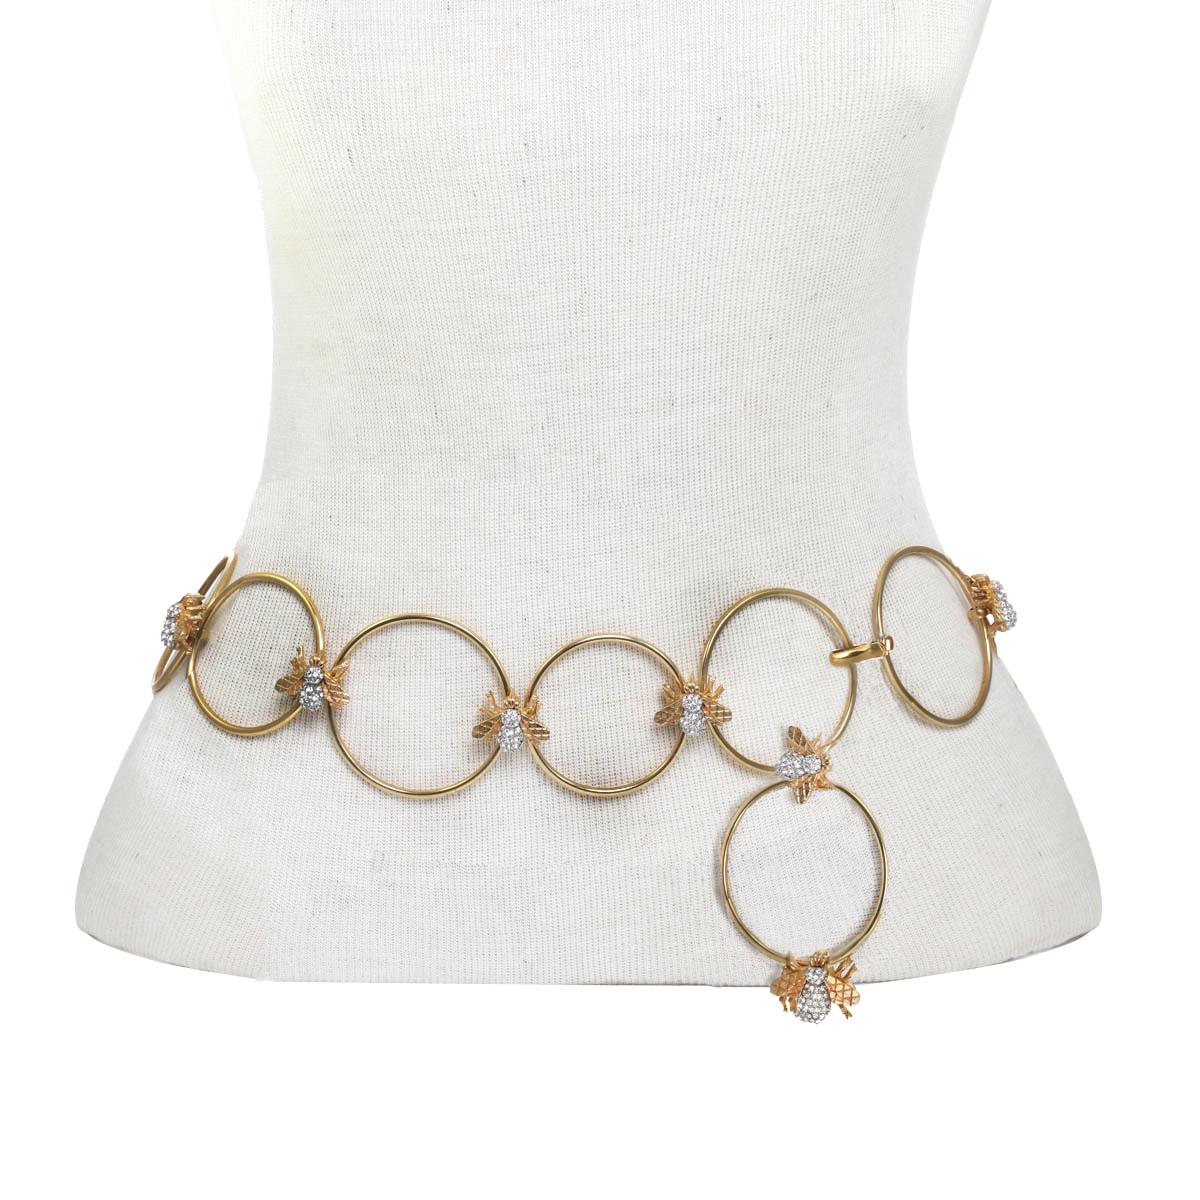 Beige Carolyne Roehm x CINER Crystal Bee Chain Belt Size: M/L For Sale